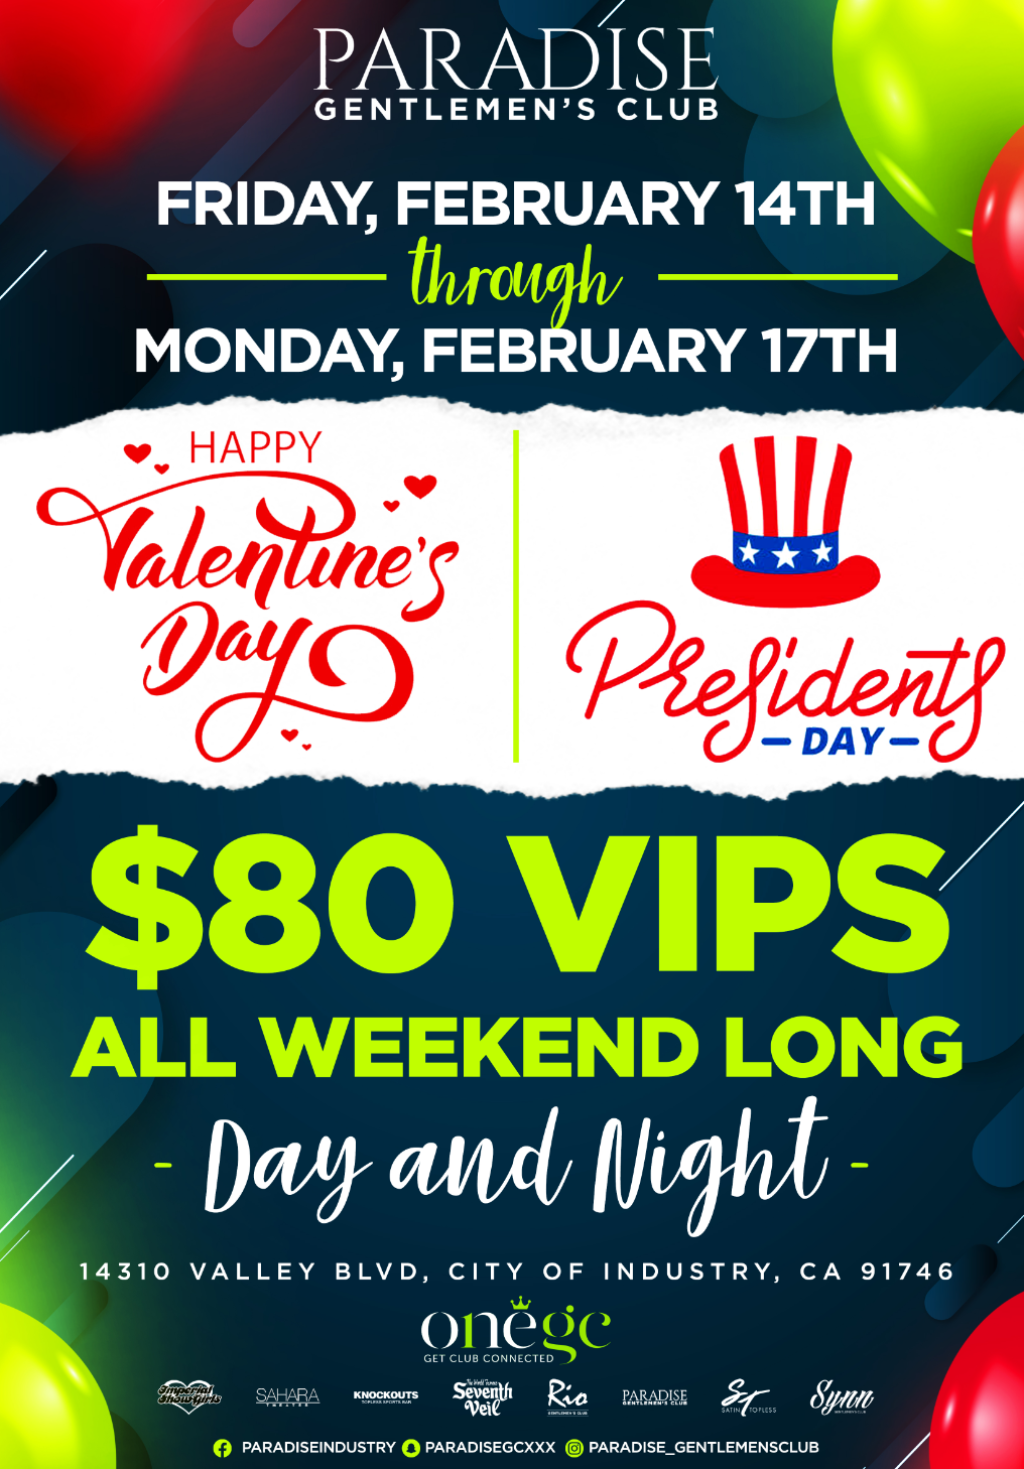 VALENTINES DAY/PRESIDENTS DAY VIP WEEKEND SPECIAL